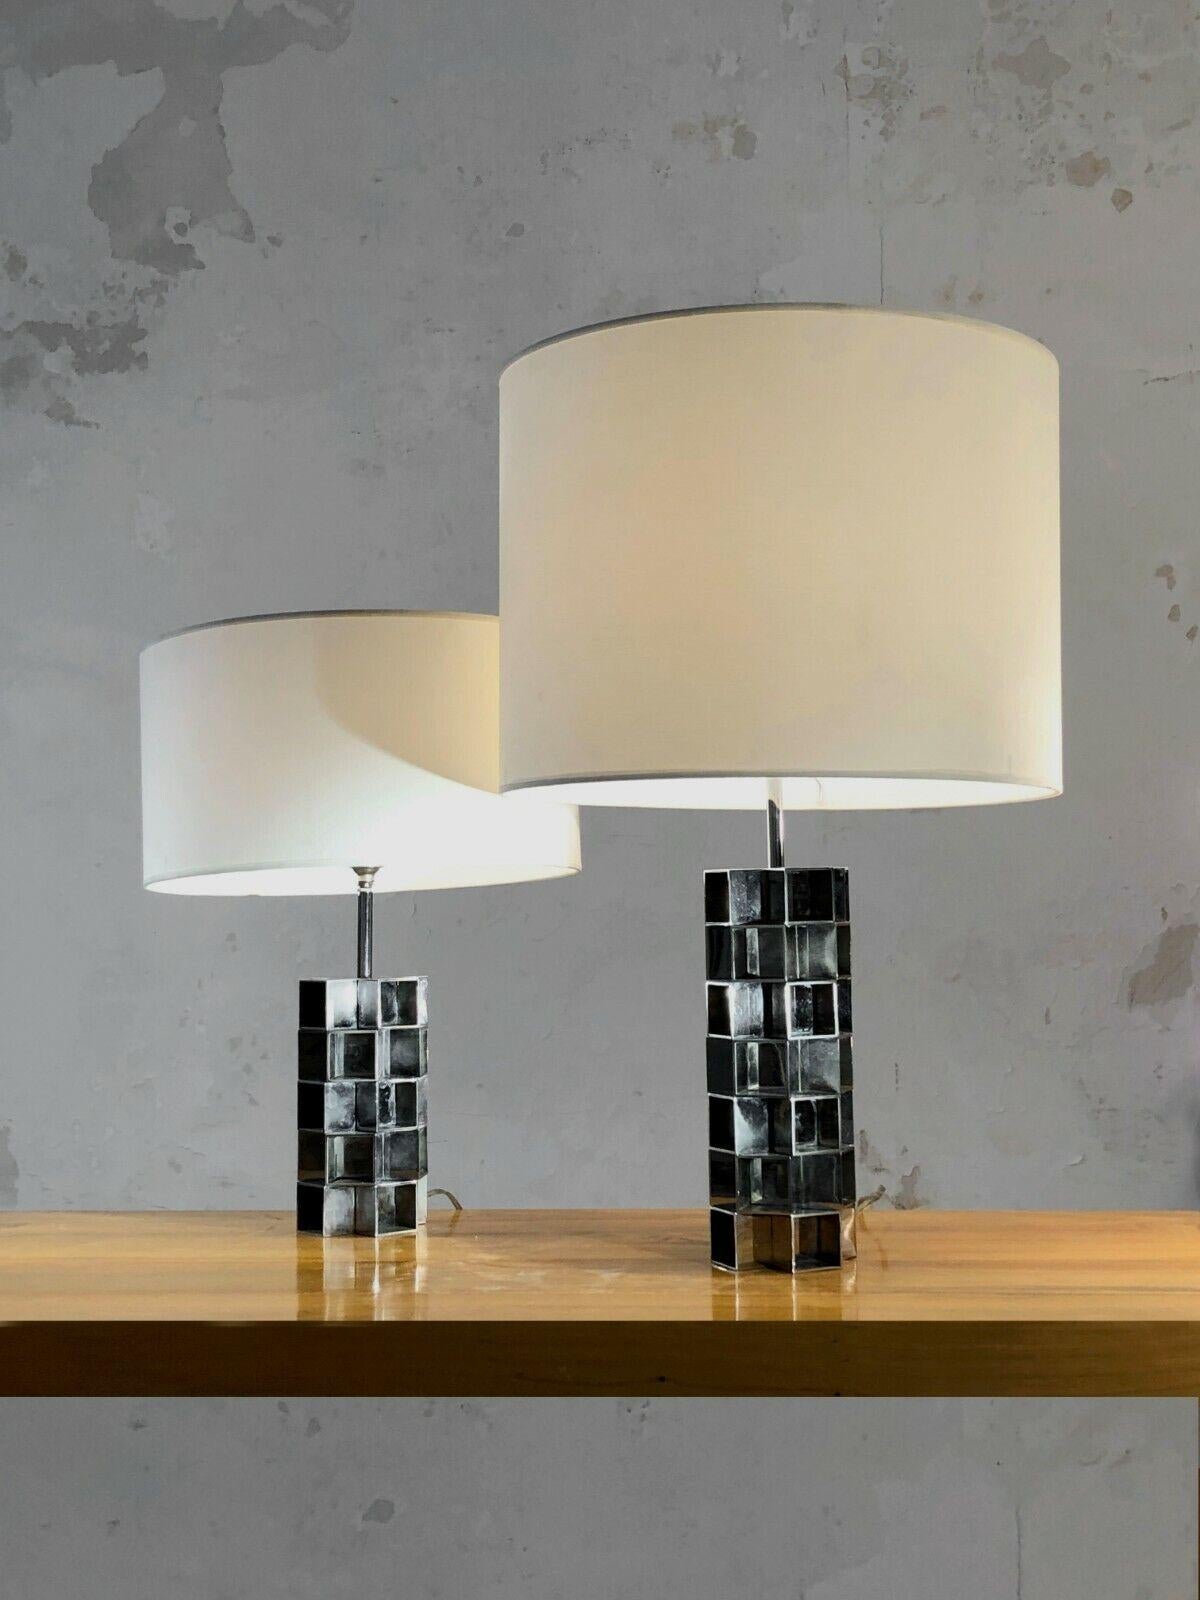 DESCRIPTION: An elegant and radical faux-pair (asymmetrical) of table lamps, Kinetic, Op-Art, Post-Modernist, Space-Age, hexagonal structure composed of a geometric accumulation of openwork cubes in nickel-plated bronze, each lamp being different